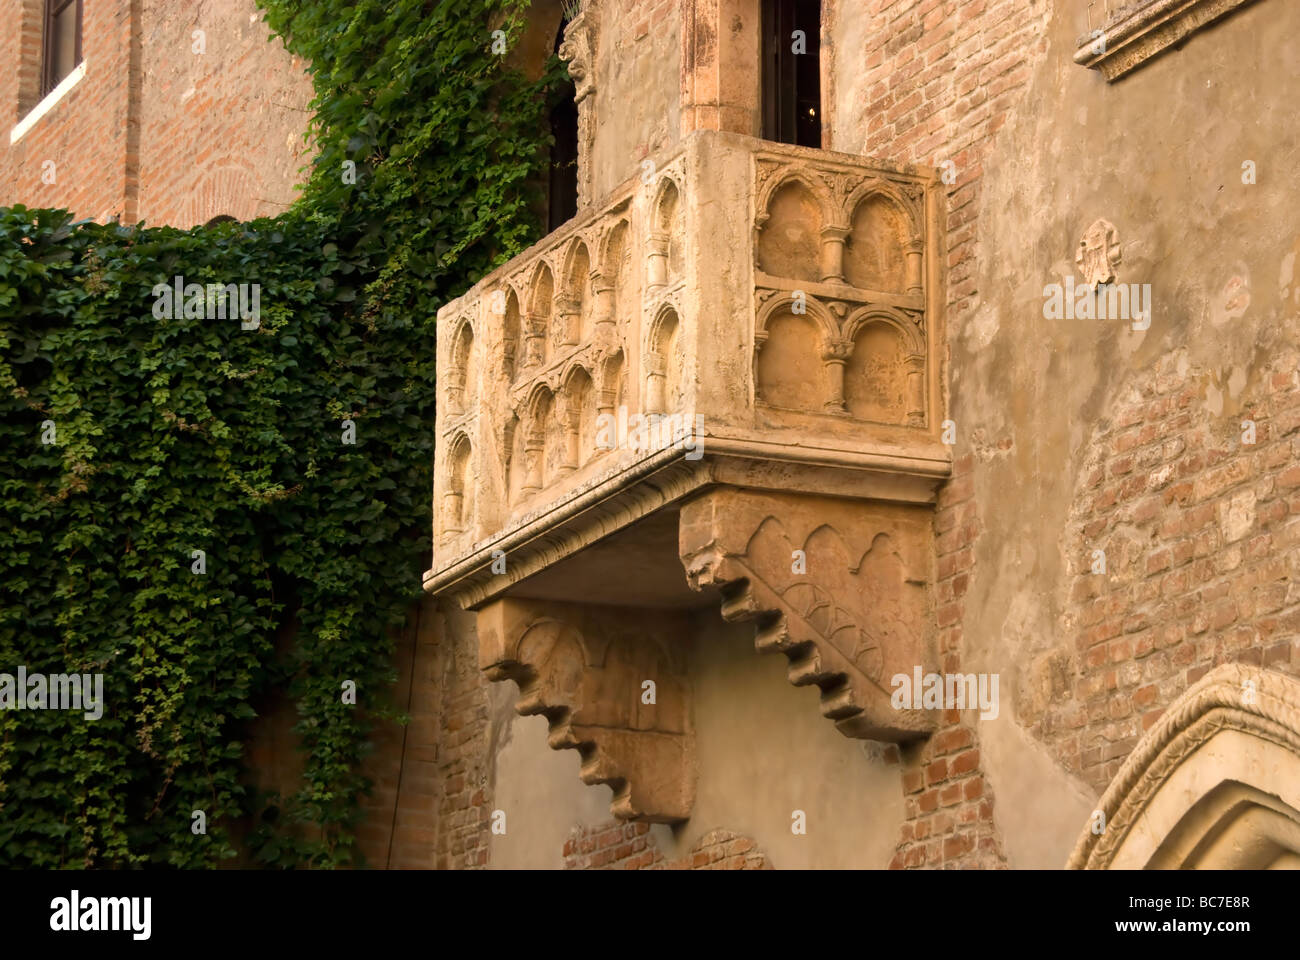 Juliet's balcony on the Via Cappello in Verona said to be the inspiration for William Shakespeare's Romeo & Juliet in Verona Northern Italy Stock Photo